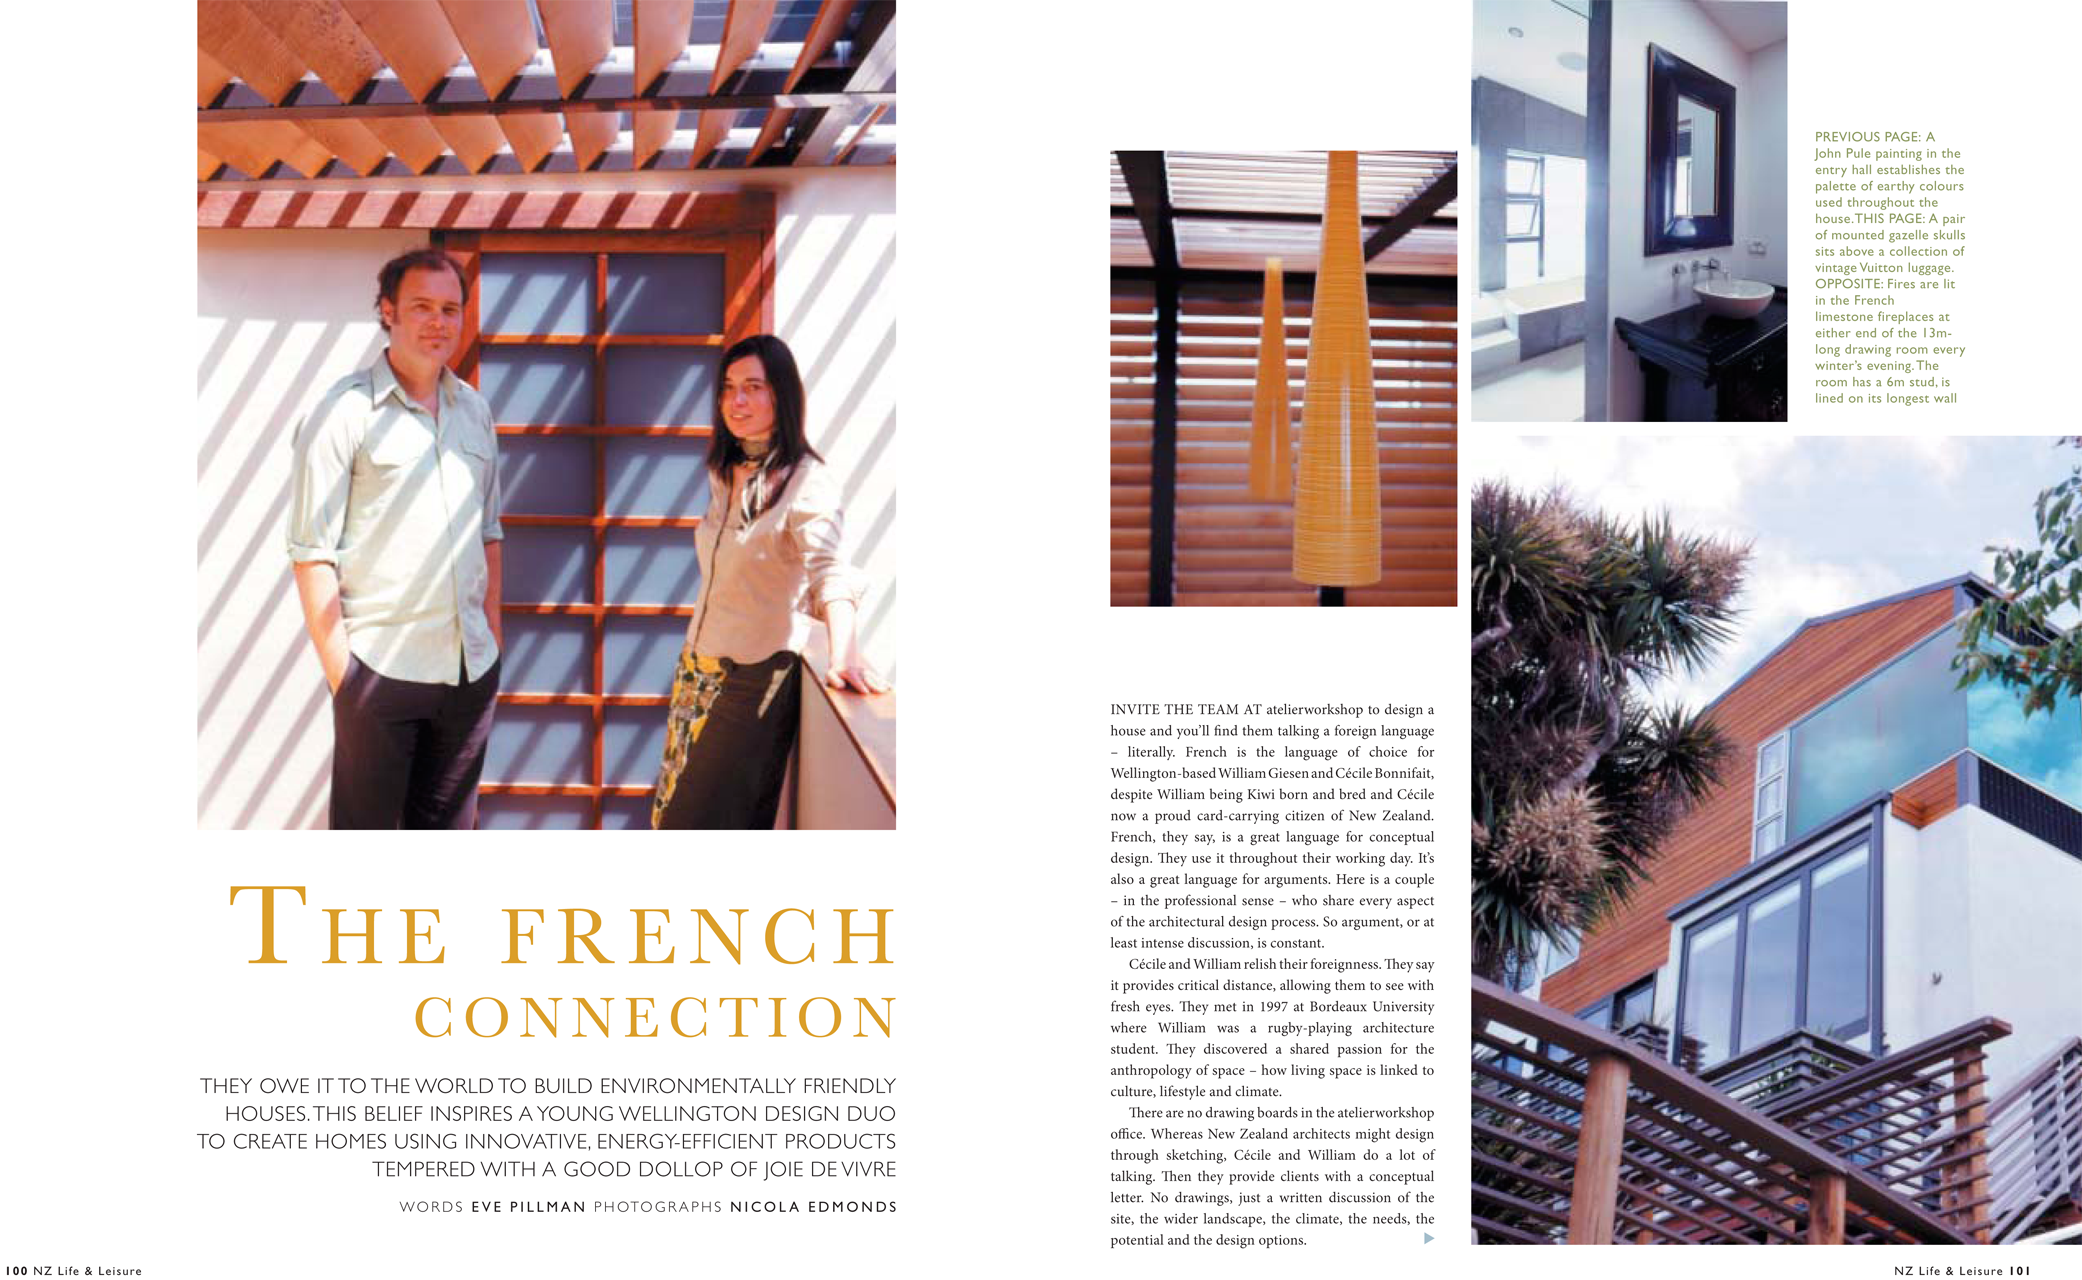 Life & Leisure - 2006 (p102)-2.png